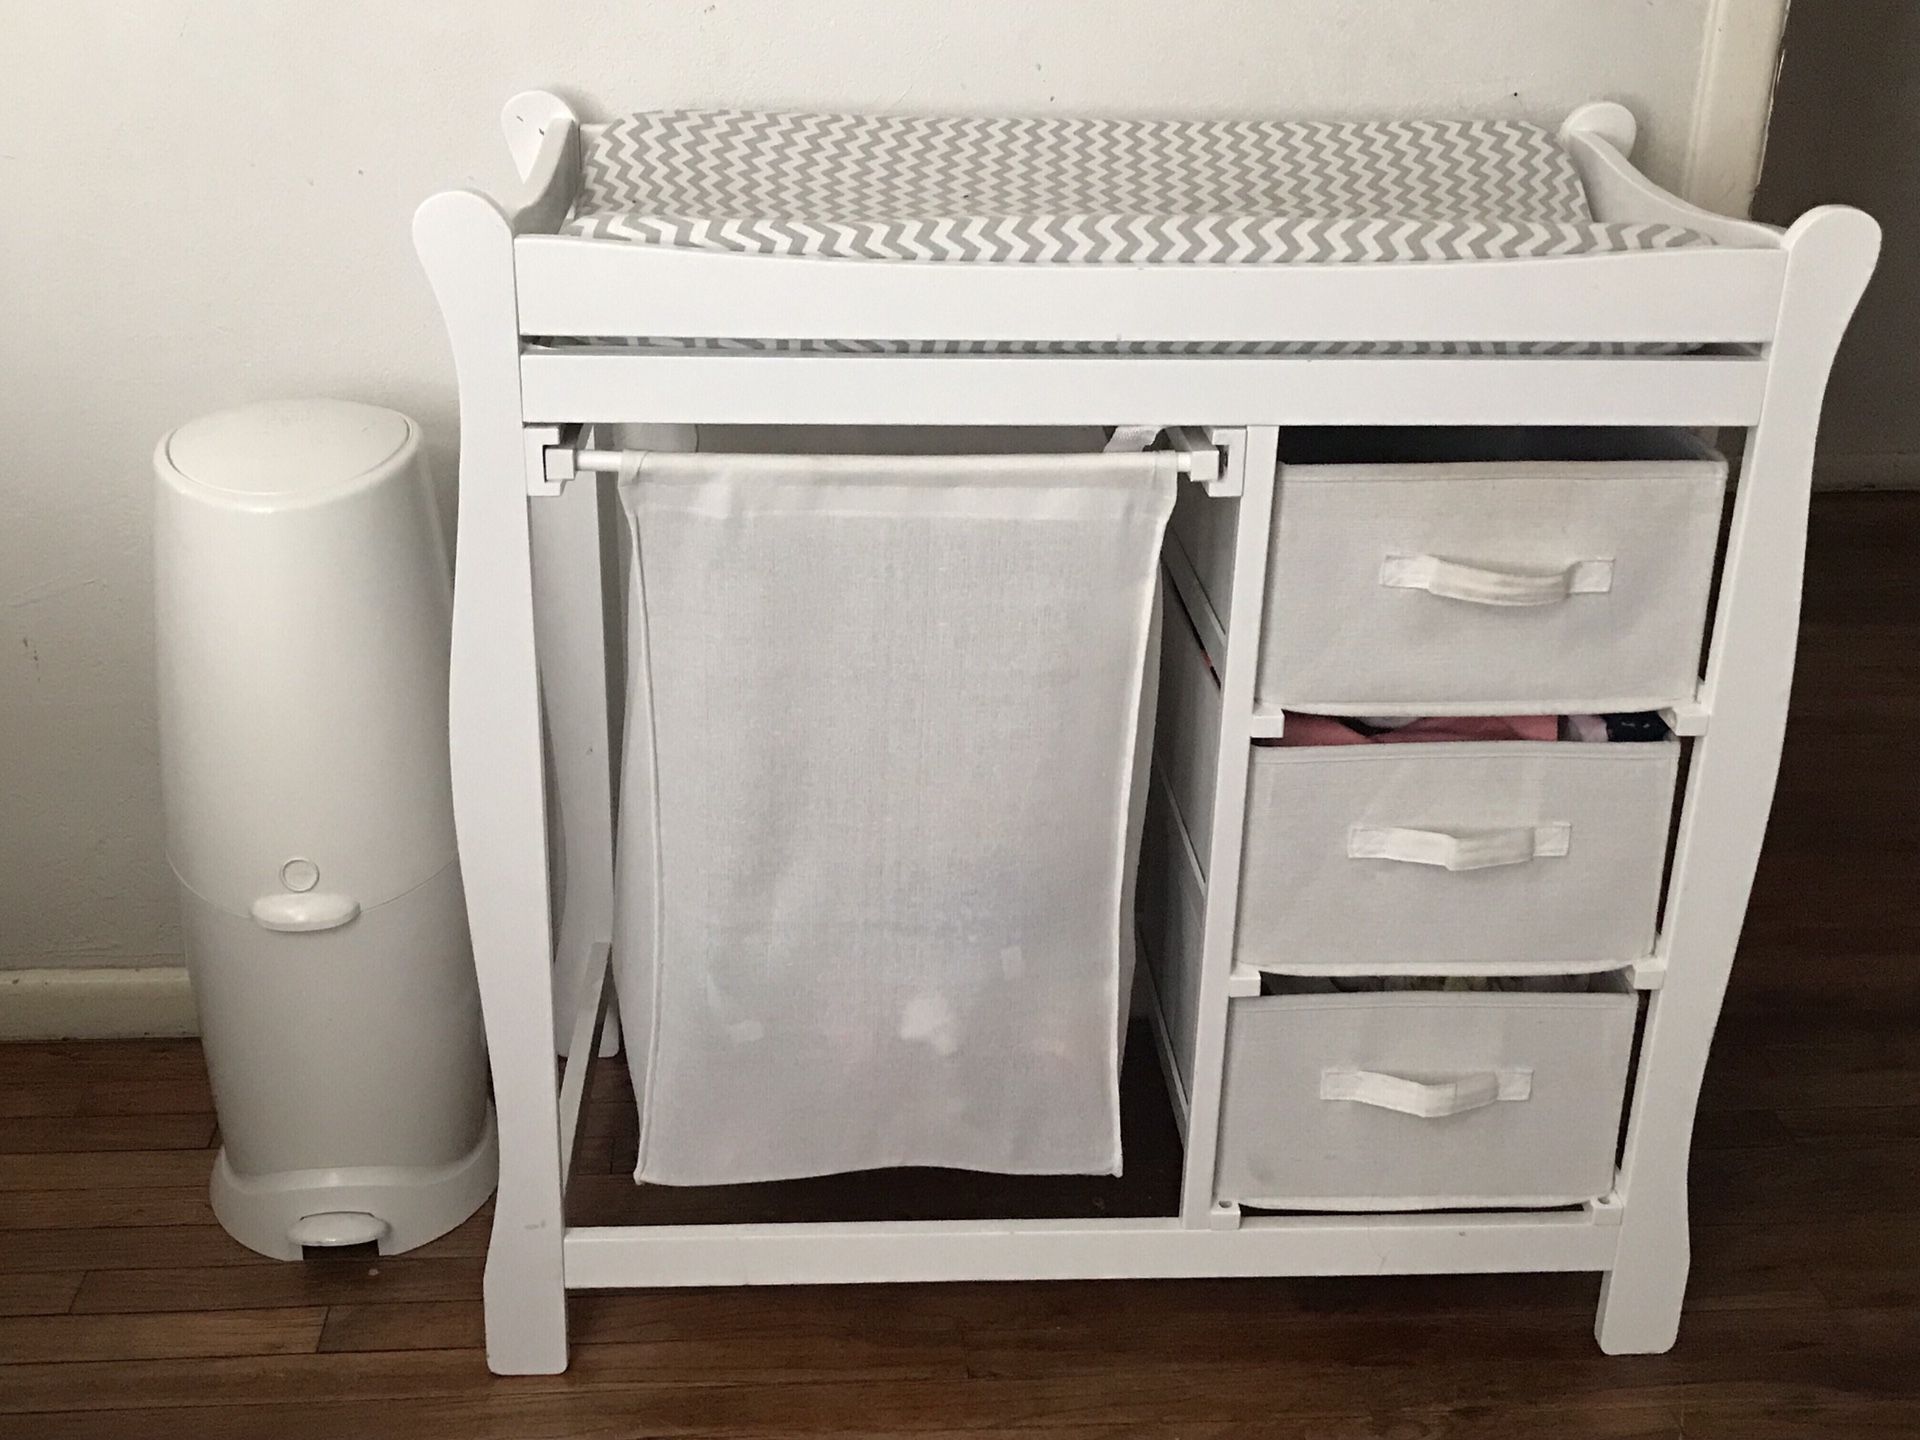 Changing table with diaper Genie